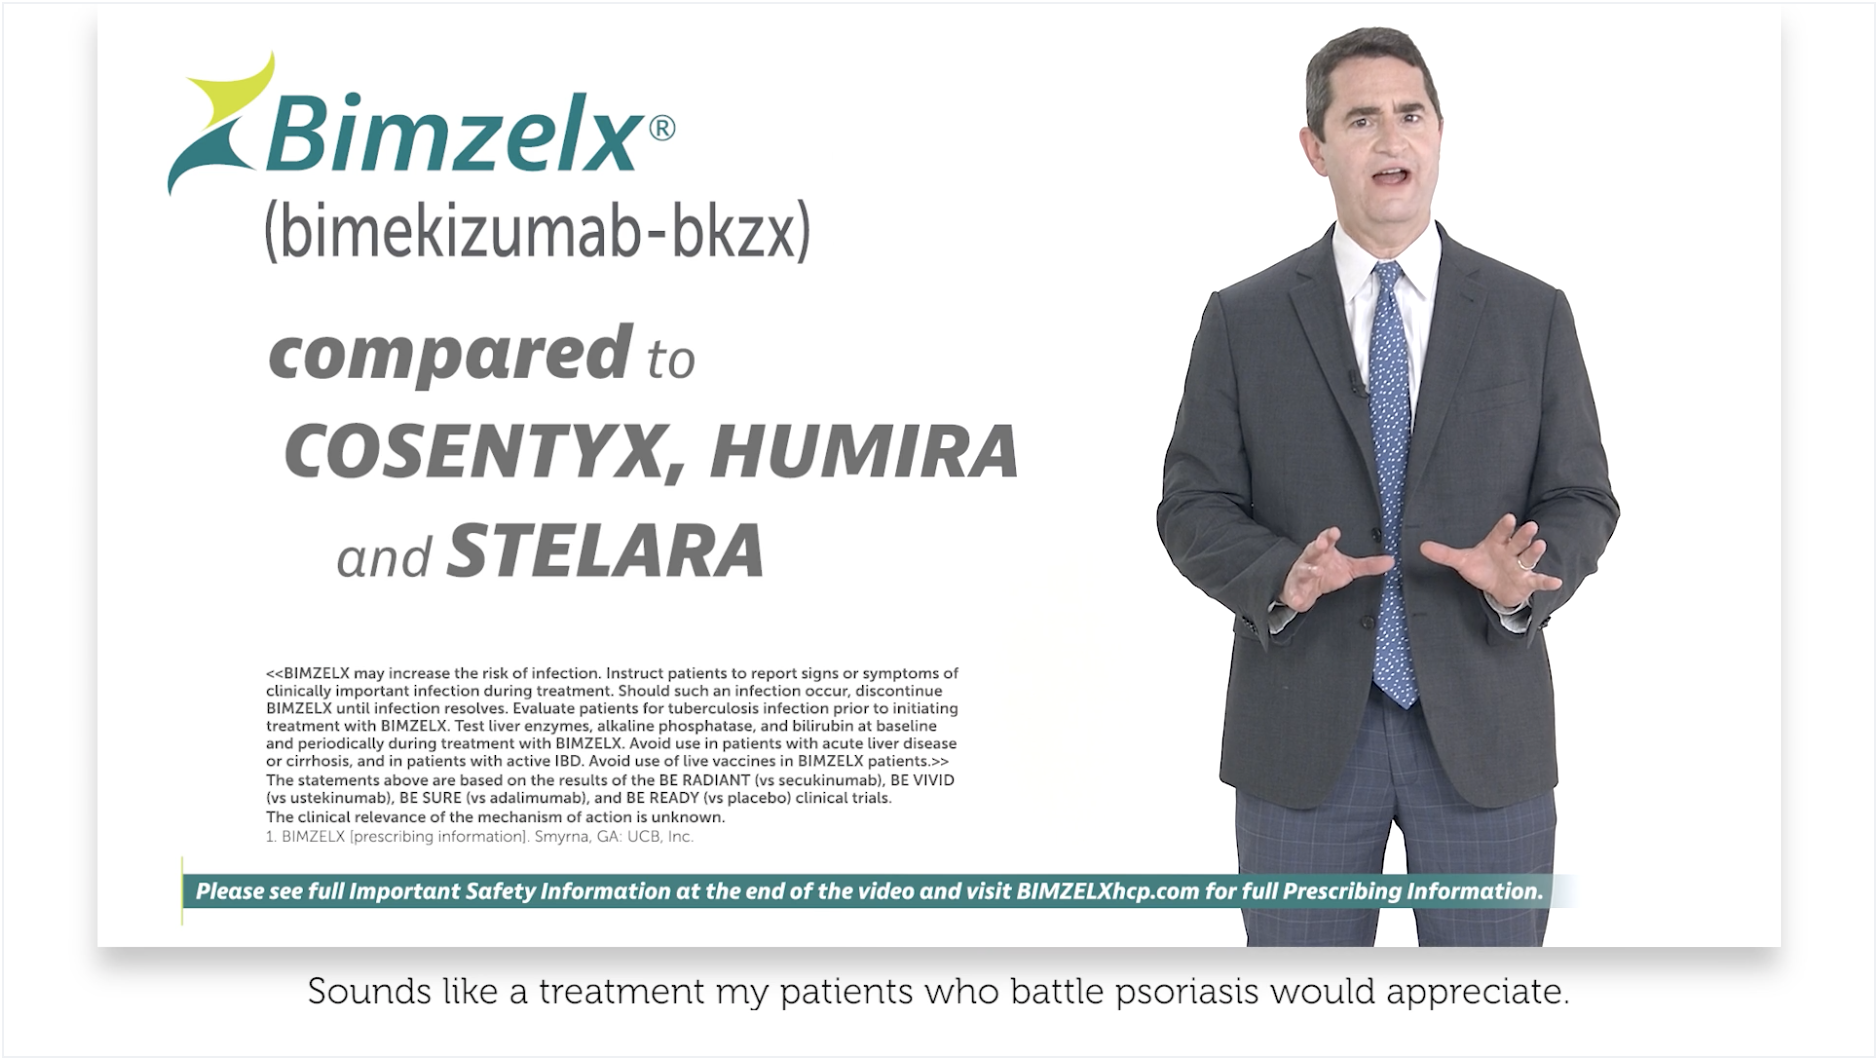 BIMZELX head-to-head video for HCPS — Dr. Bruce Strober speaking to the camera. BIMZELX logo and words, “compared to COSENTYX, HUMIRA and STELARA” are onscreen.